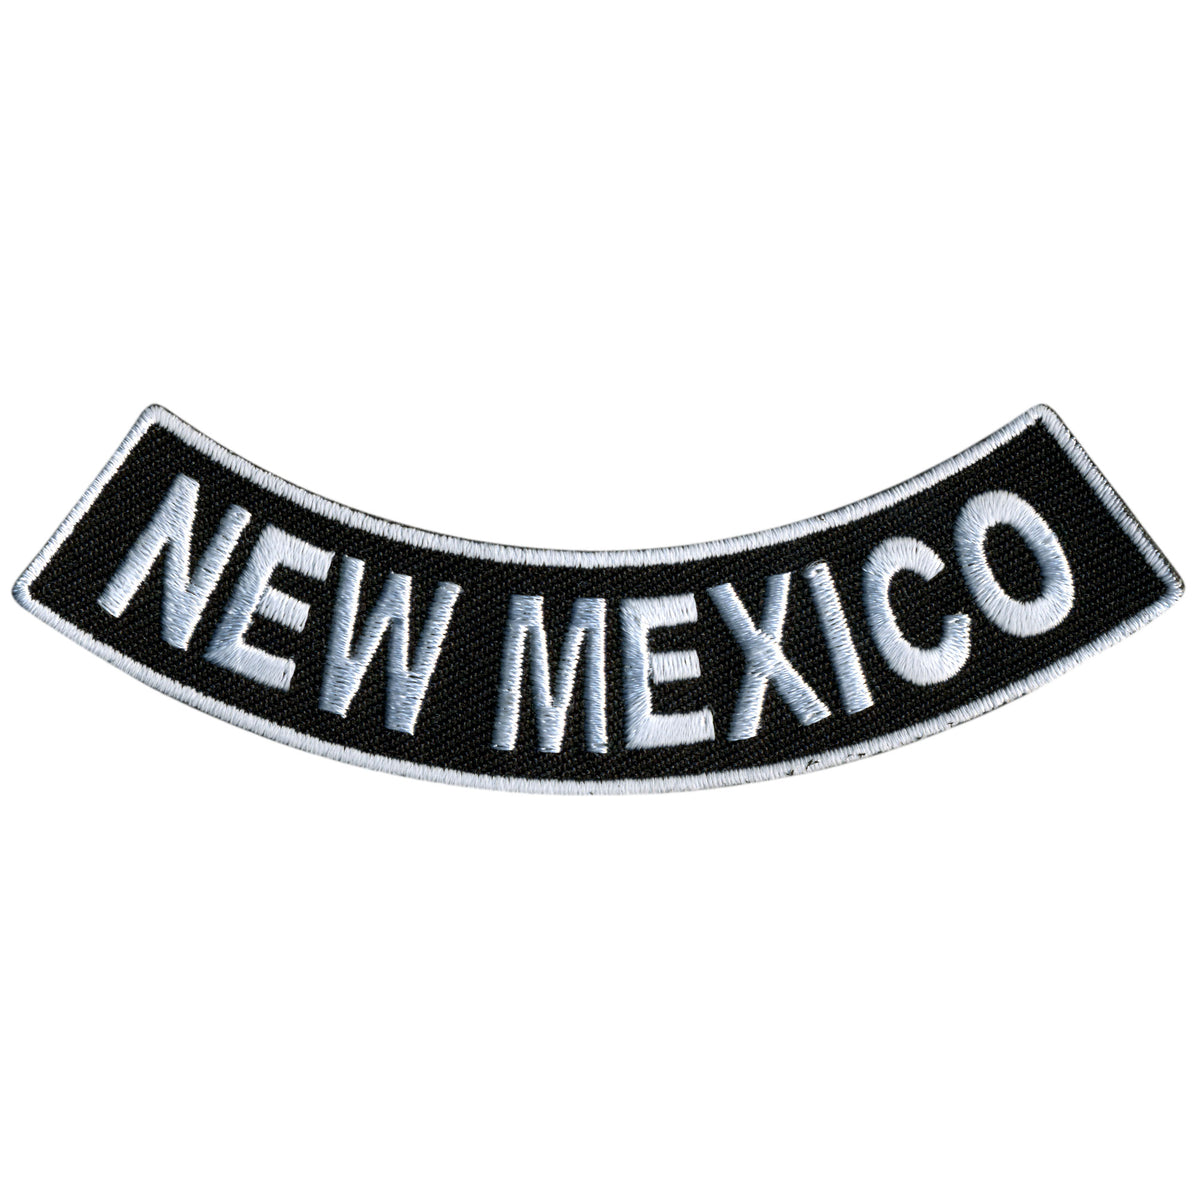 Hot Leathers New Mexico 4” X 1” Bottom Rocker Patch